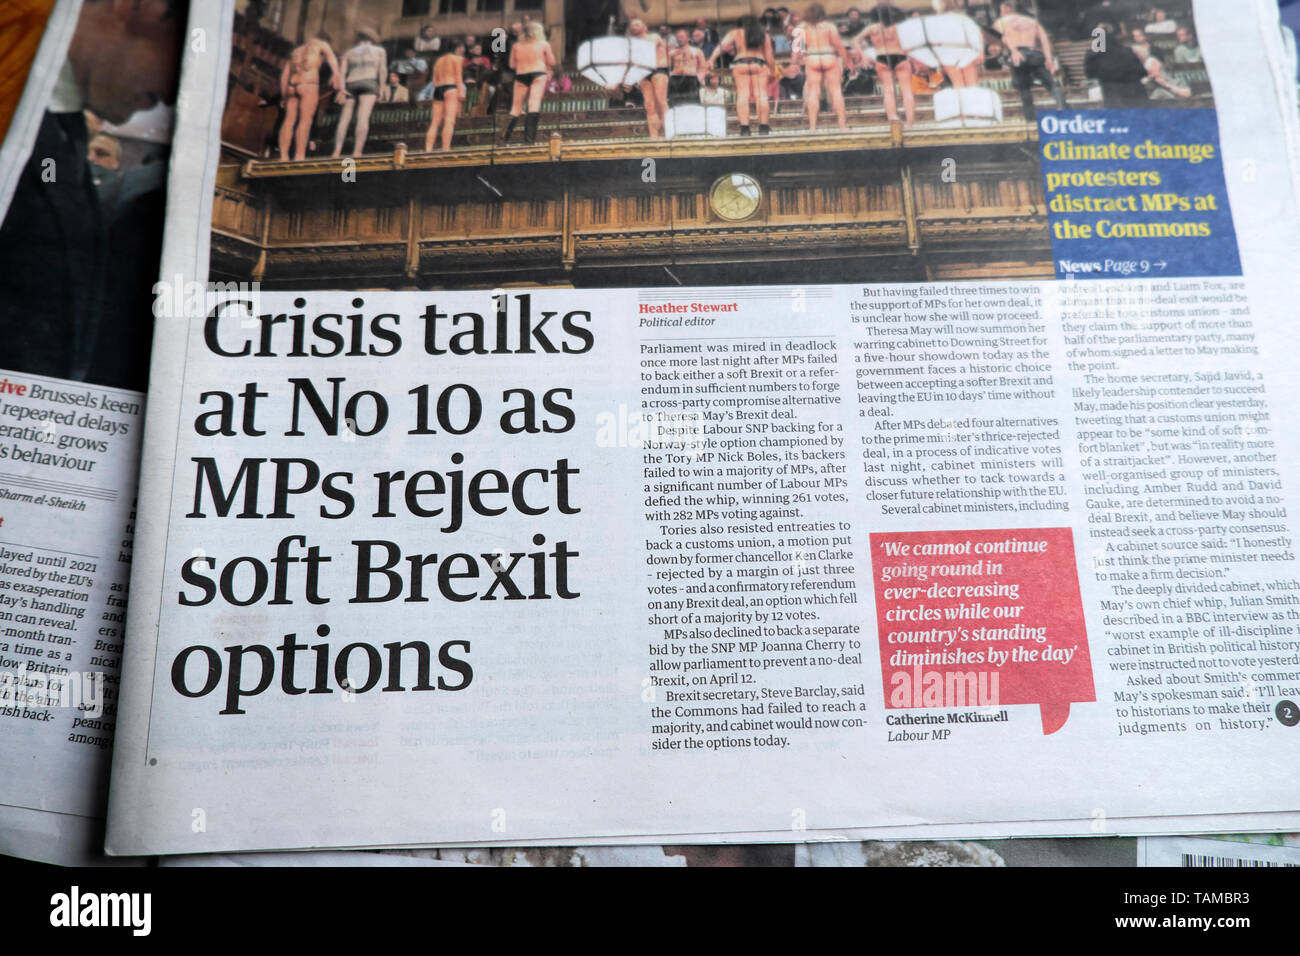 'Crisis talks at No 10 as MPs reject soft Brexit options' newspaper headline in Guardian news paper article on 2 April 2019 London England Britain UK Europe  European Union EU Stock Photo